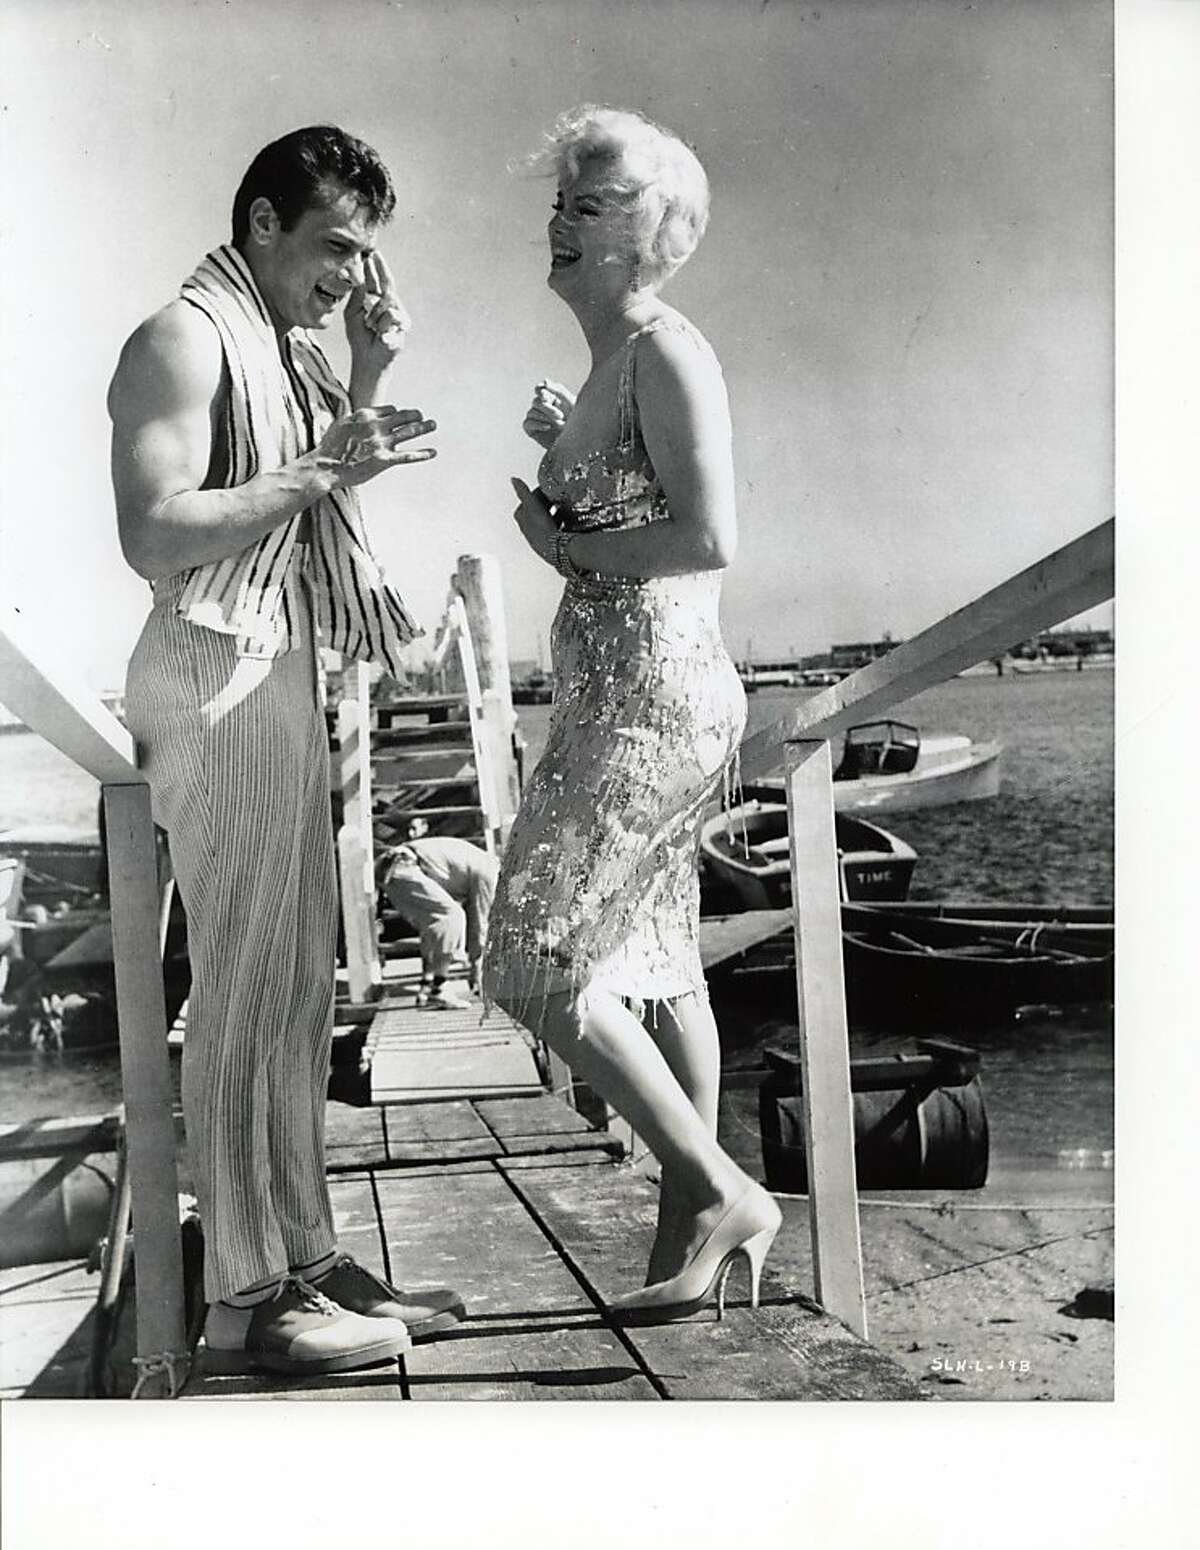 Tony Curtis and Marilyn Monroe on the set of "Some Like it Hot."